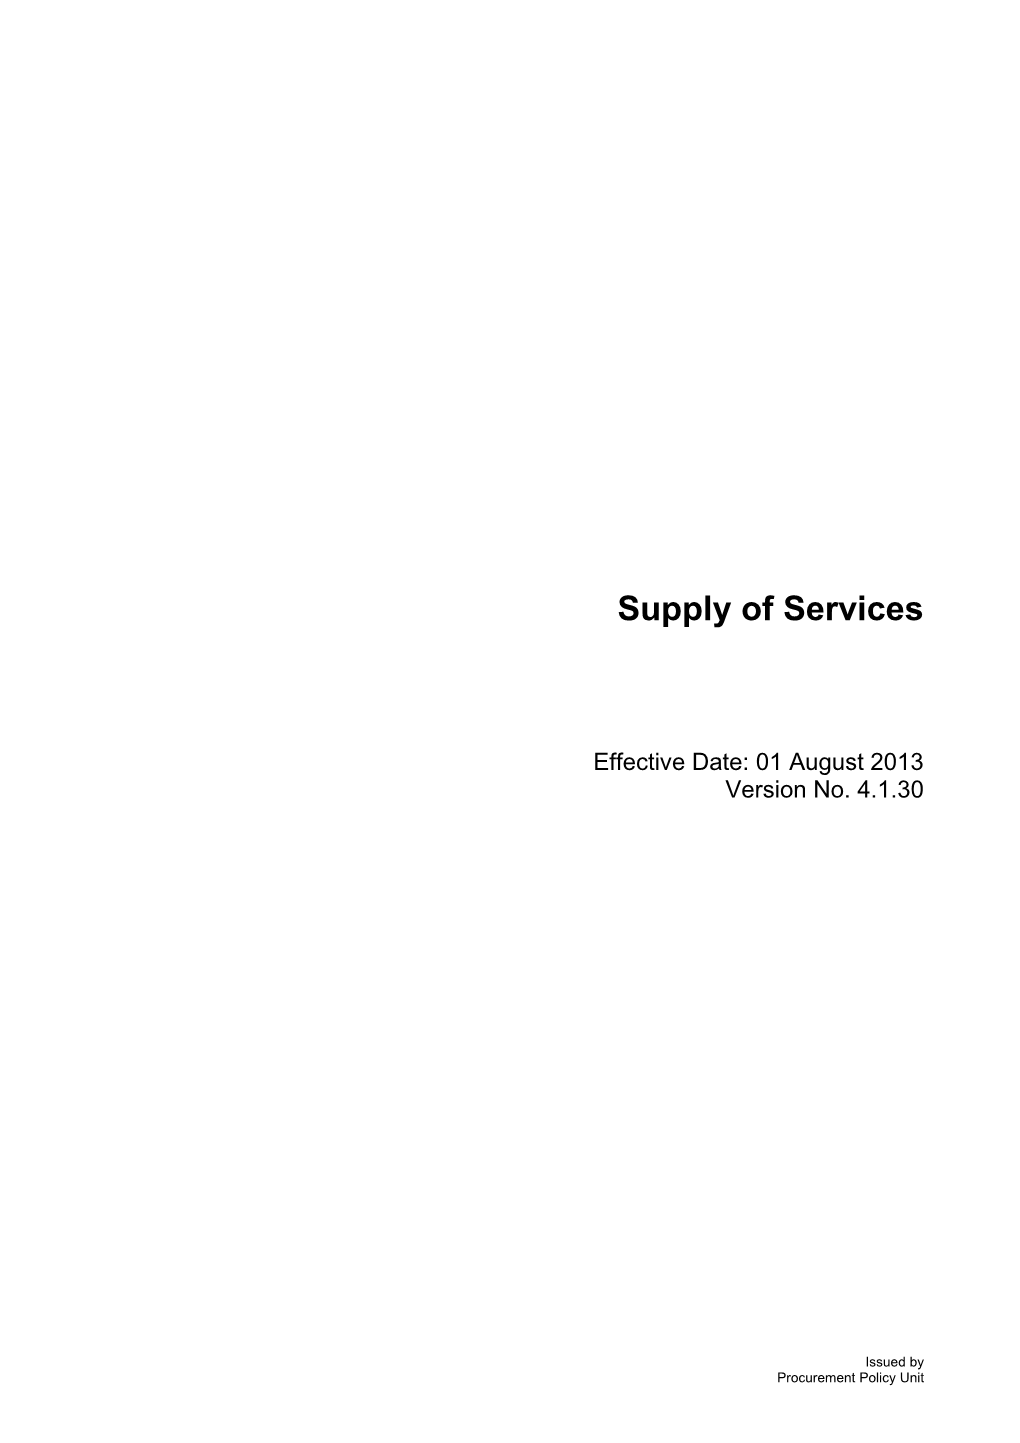 Supply of Services - V 4.1.30 (01 August 2013)